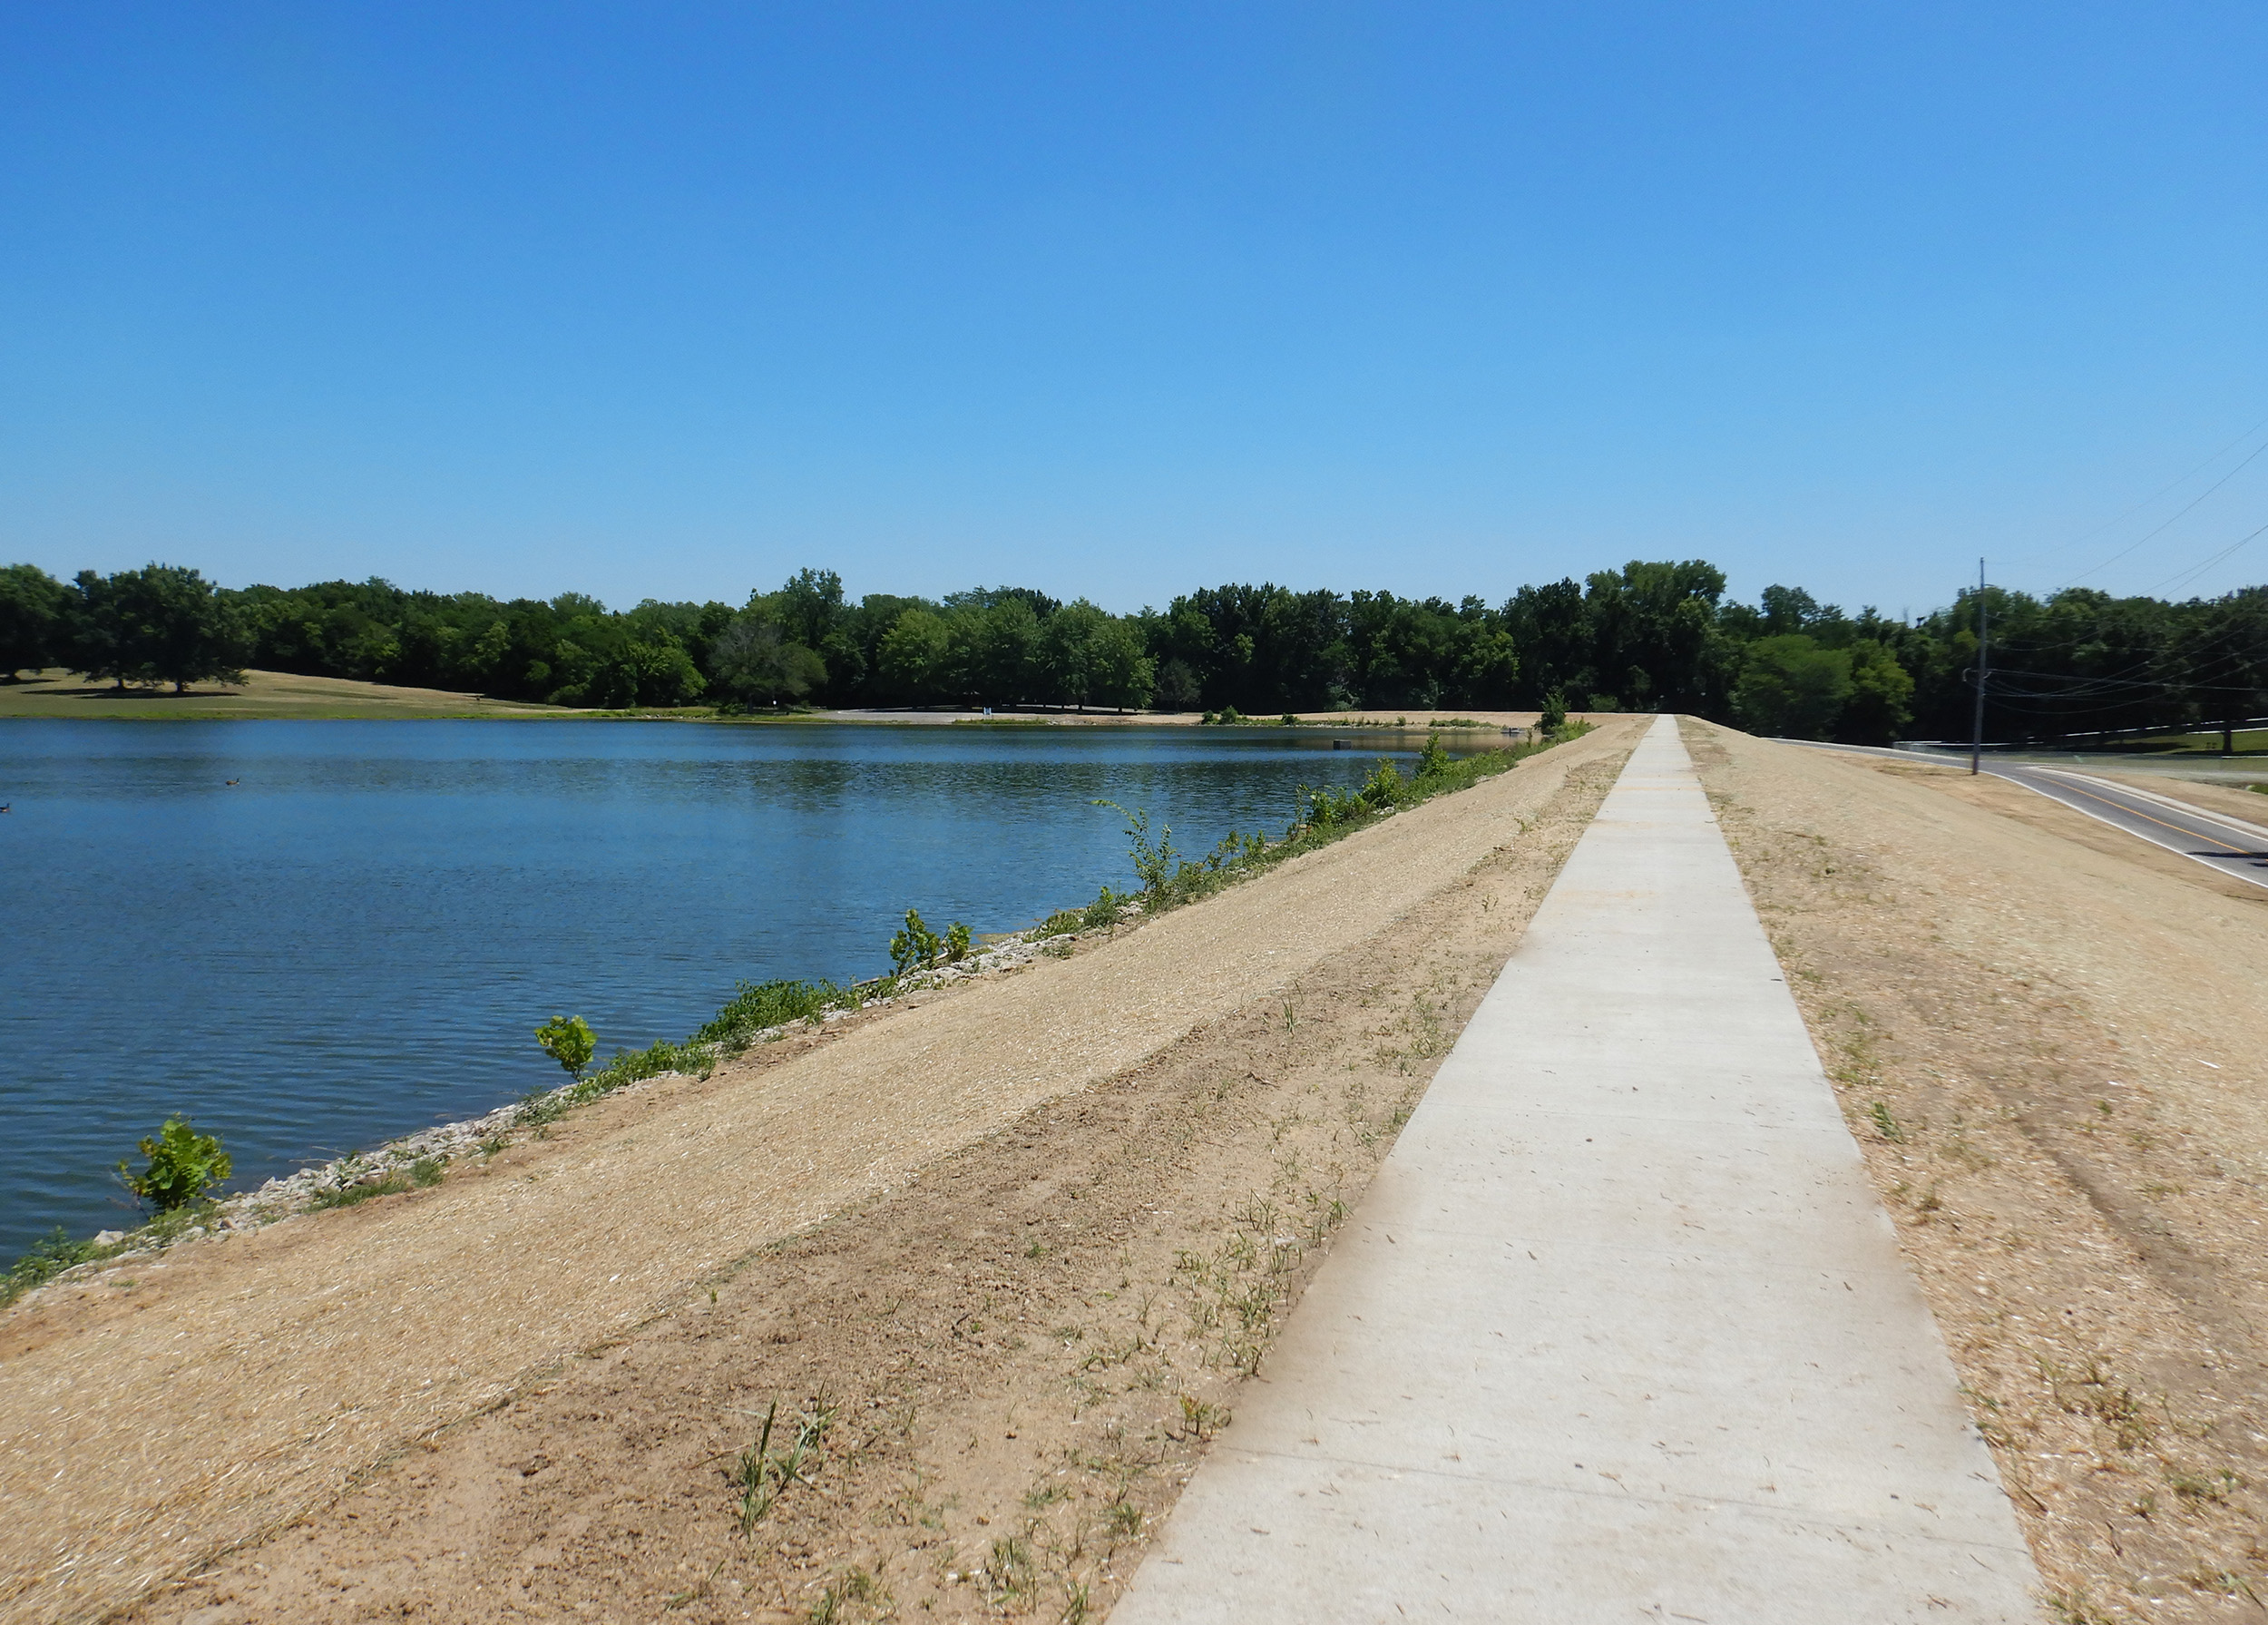 The project encompassed environmental studies, geotechnical investigations, and field surveys, illustrating a holistic approach to safeguarding the community and maintaining or enhancing the amenities in the Harrisonville City Park.